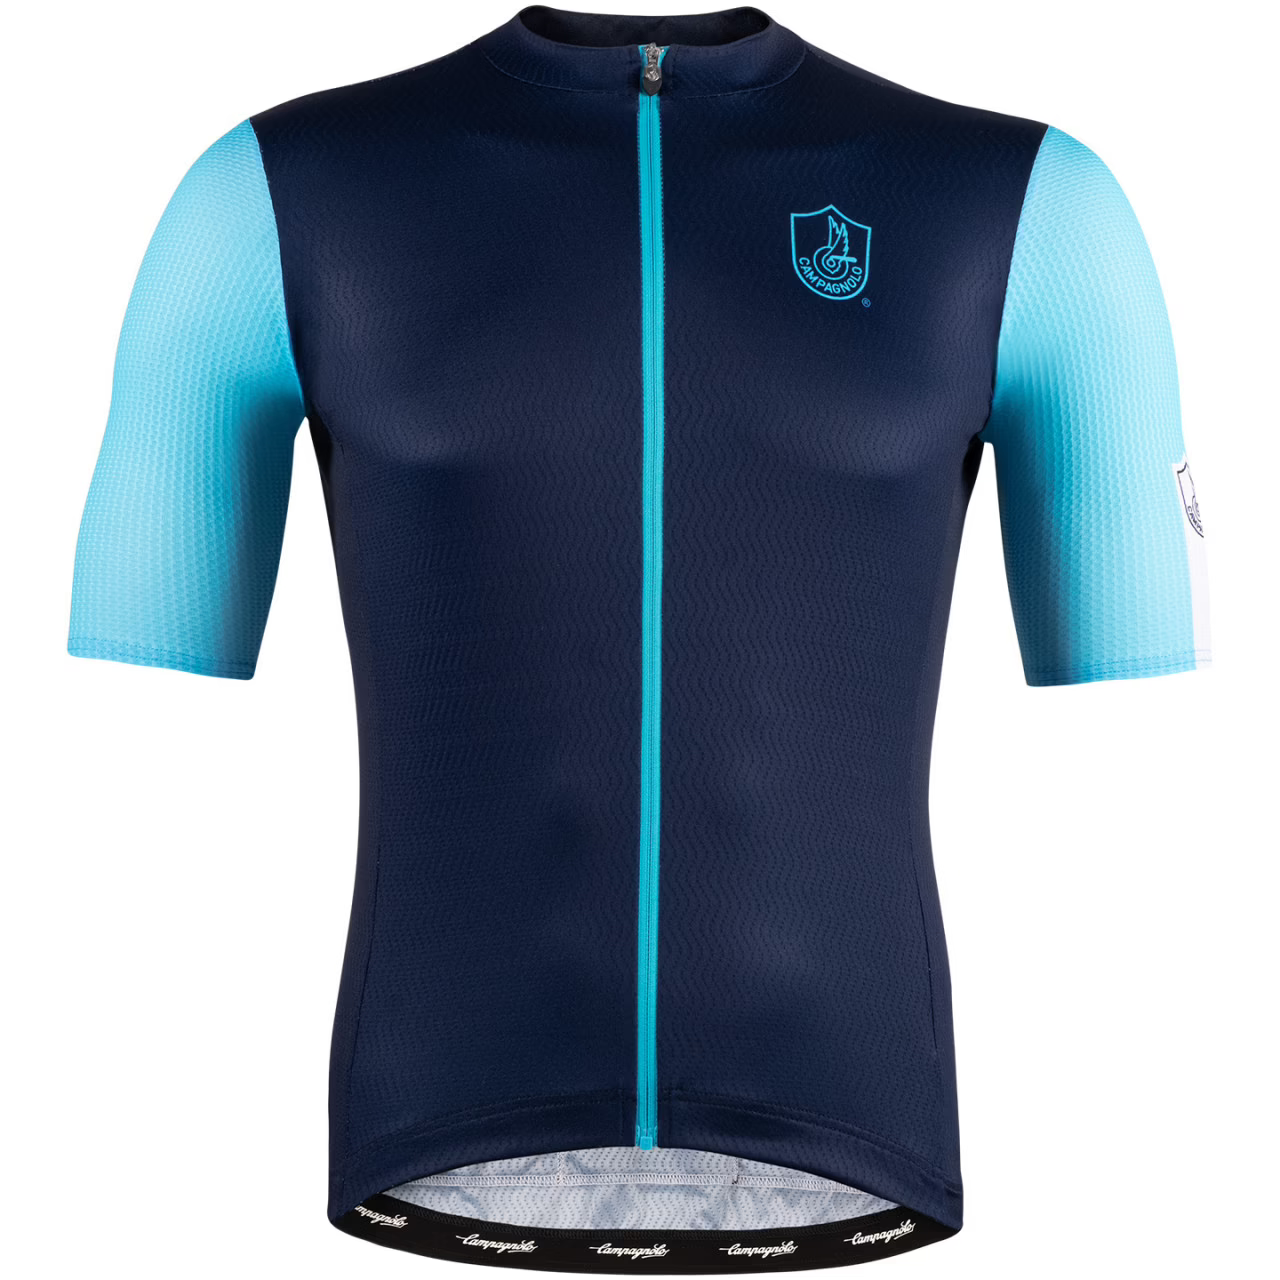 Campagnolo INDIO Men's Cycling Jersey (Blue) S, M, L, 2XL, 3XL